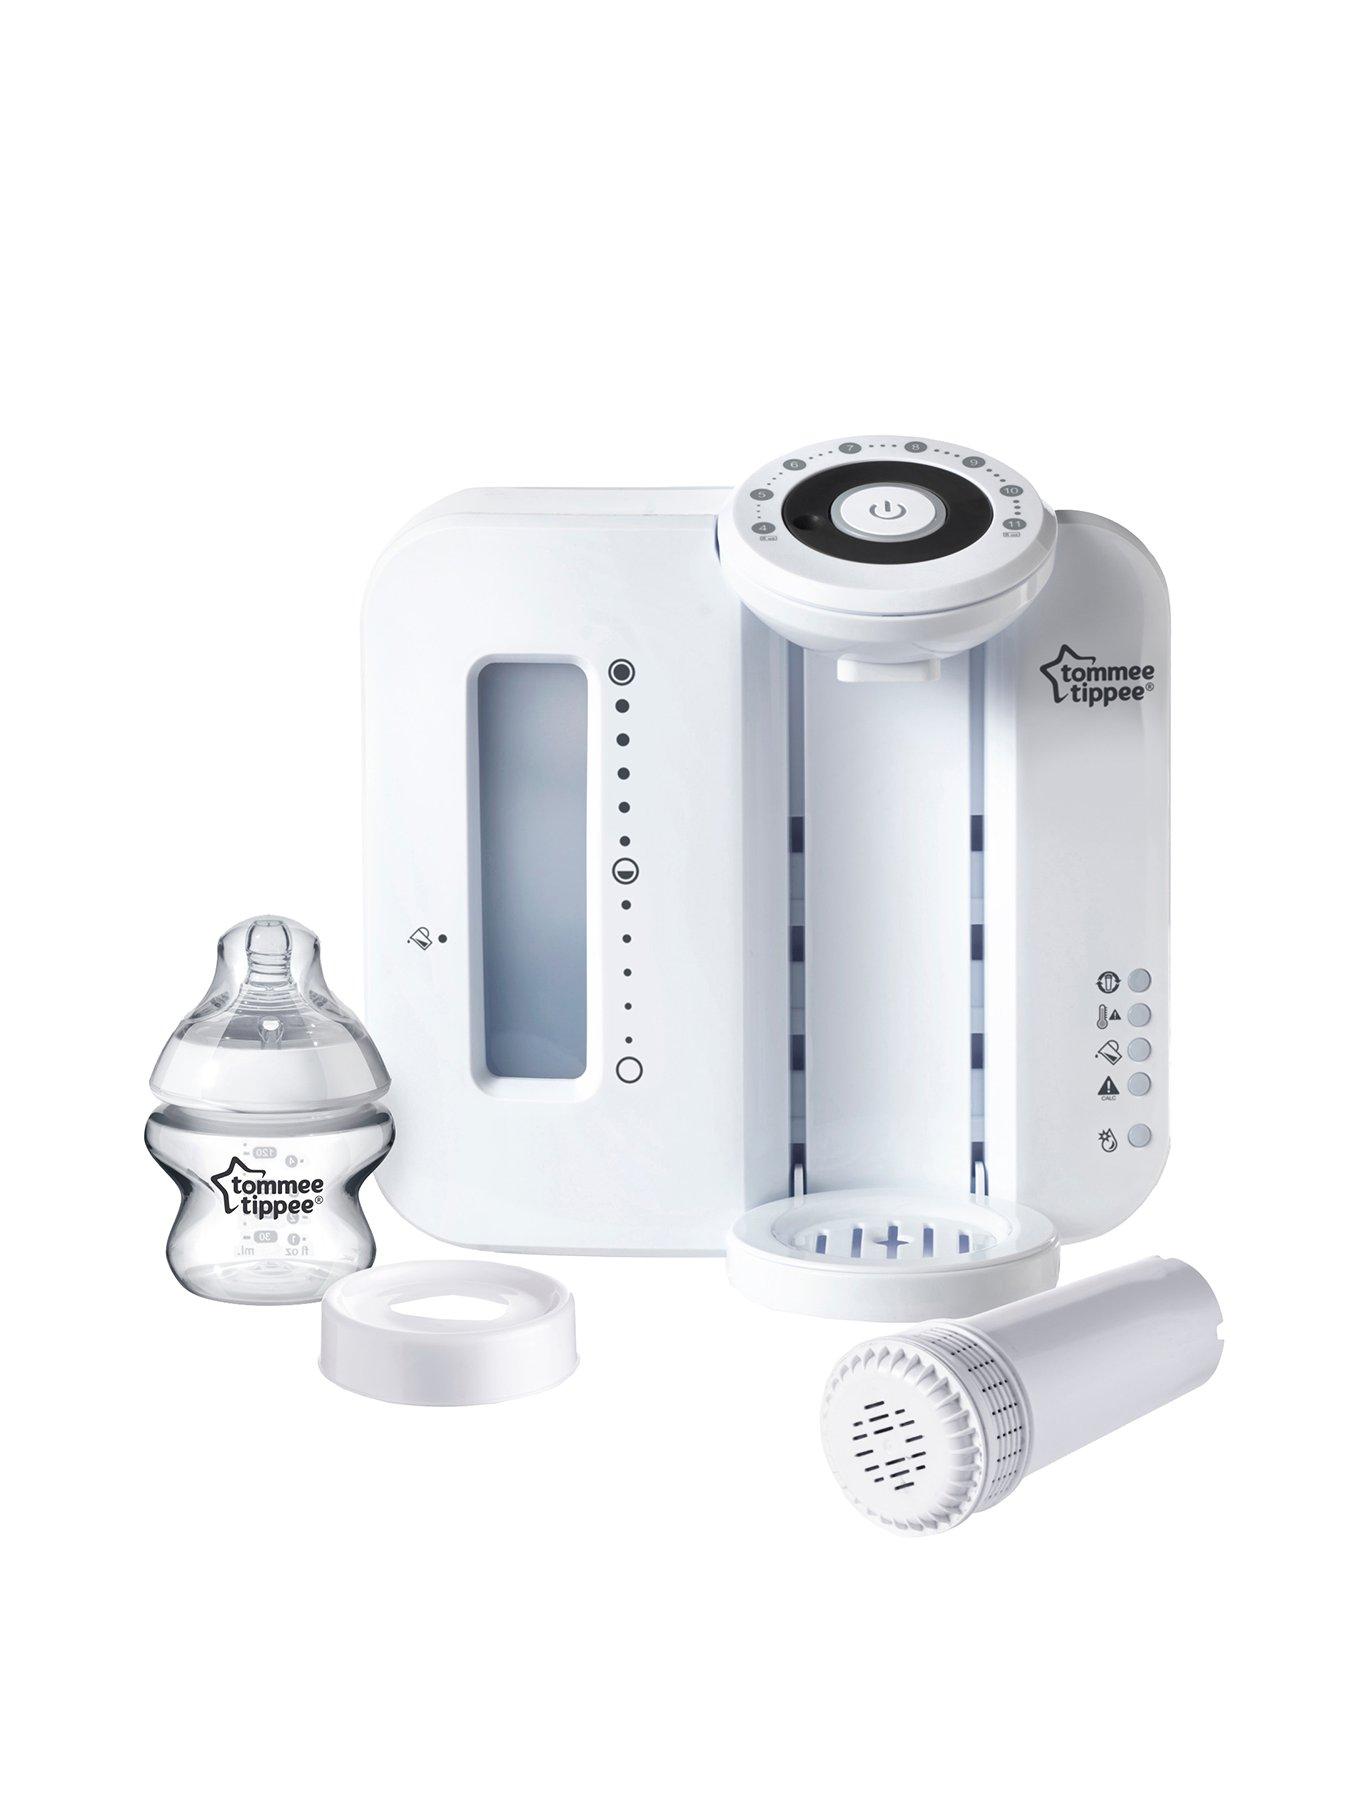 Tommee Tippee Perfect Prep a € 88,57 (oggi)